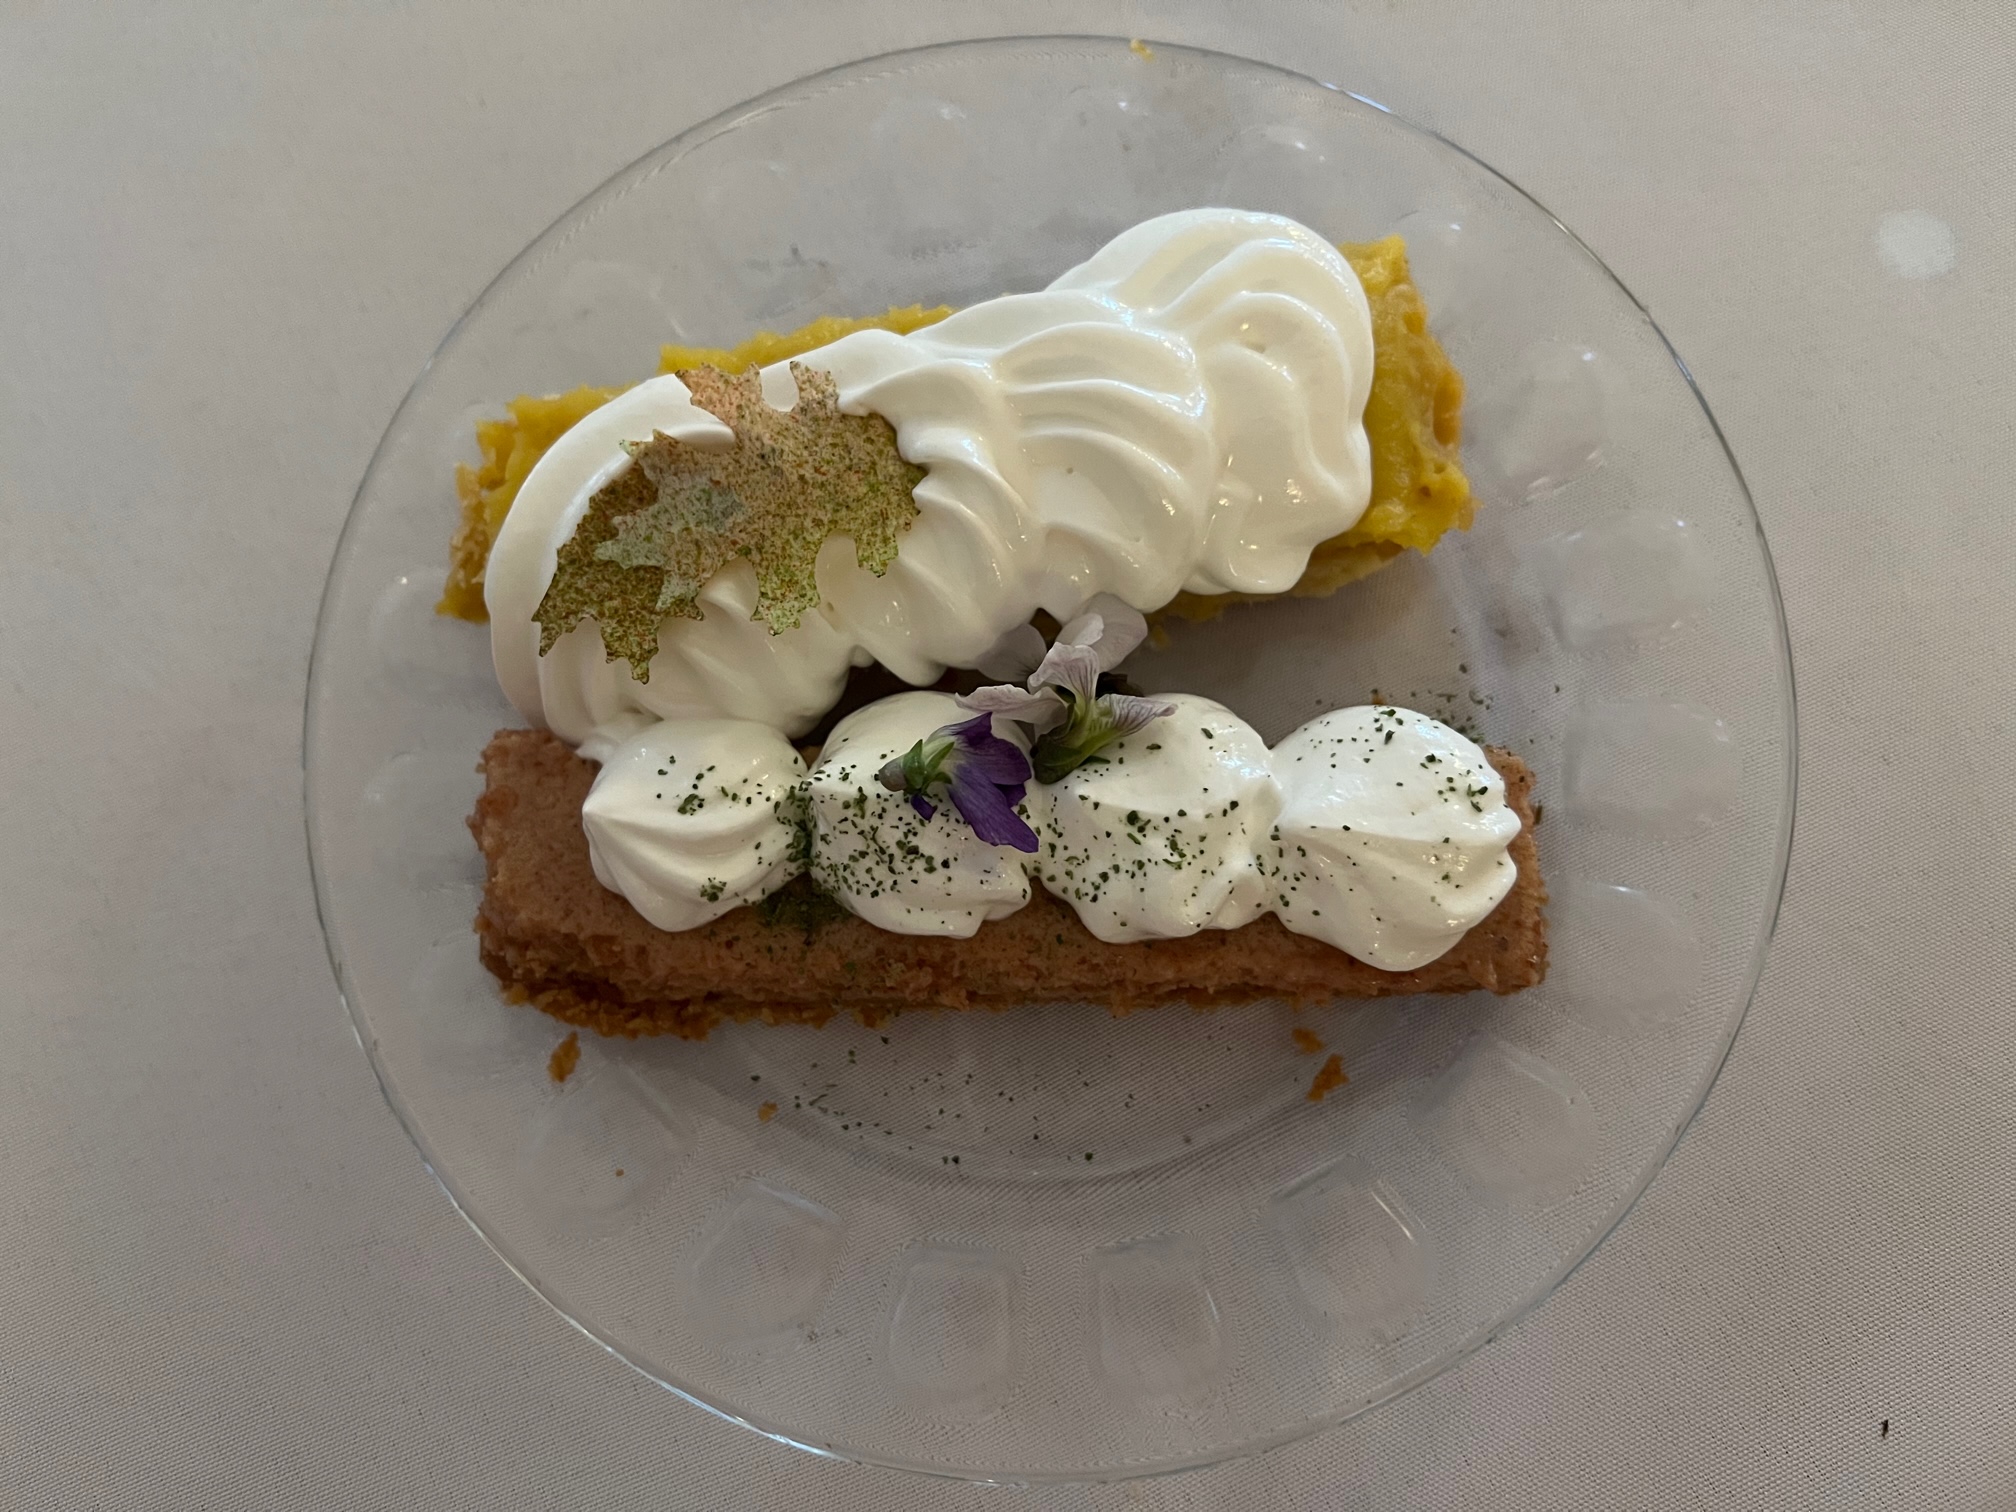 A small clear round plate on a white tablecloth. It is topped with two dessert bars, one yellow and one brown, and they are topped with swirled white cream. Photo by Julie McClure.